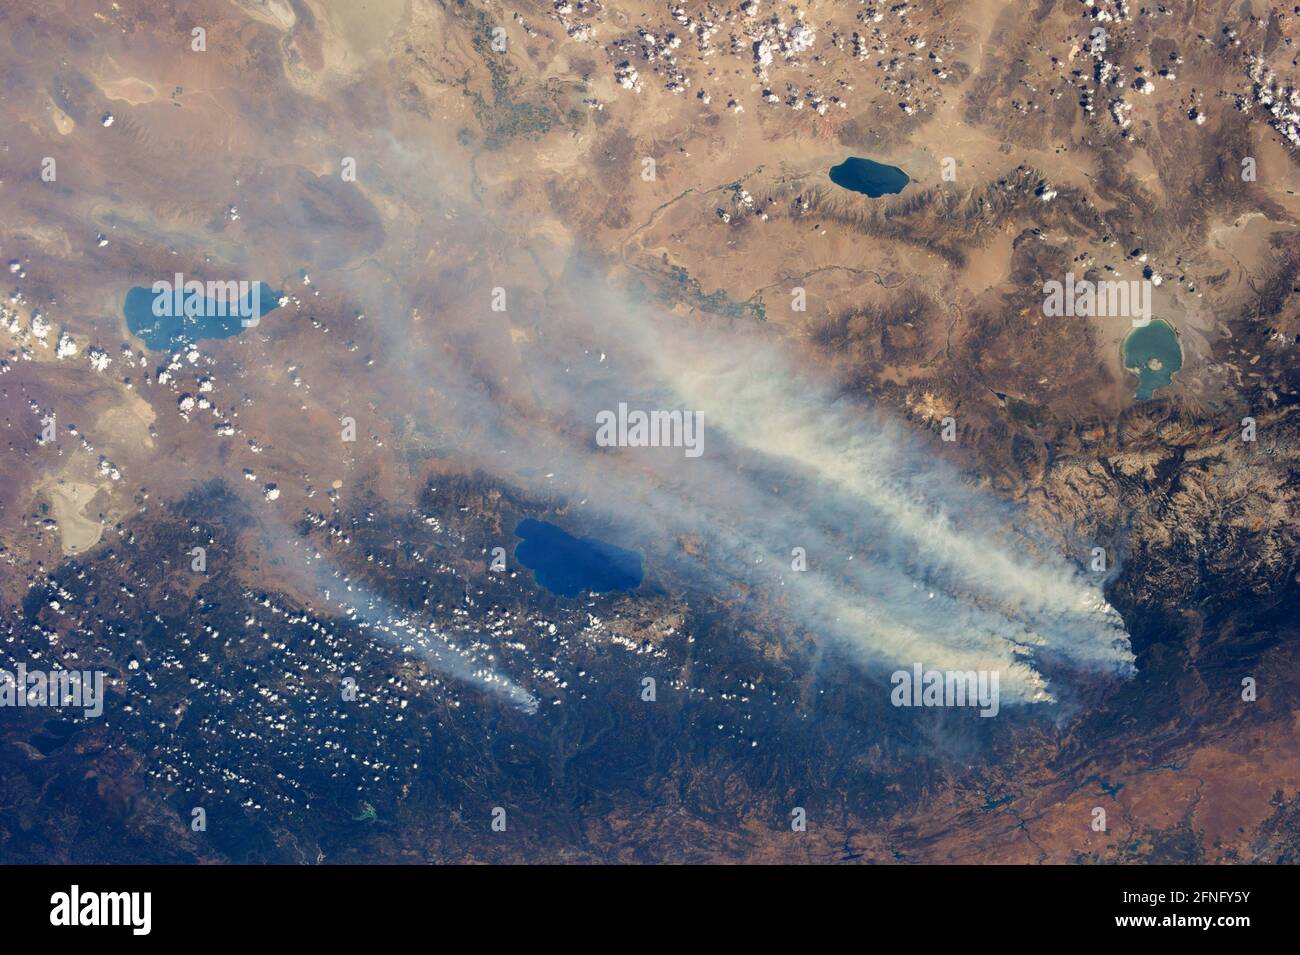 CALIFORNIA, USA - 26 August 2013 - One of the crew members aboard the International Space Station used a 50mm lens to record this view of the massive Stock Photo